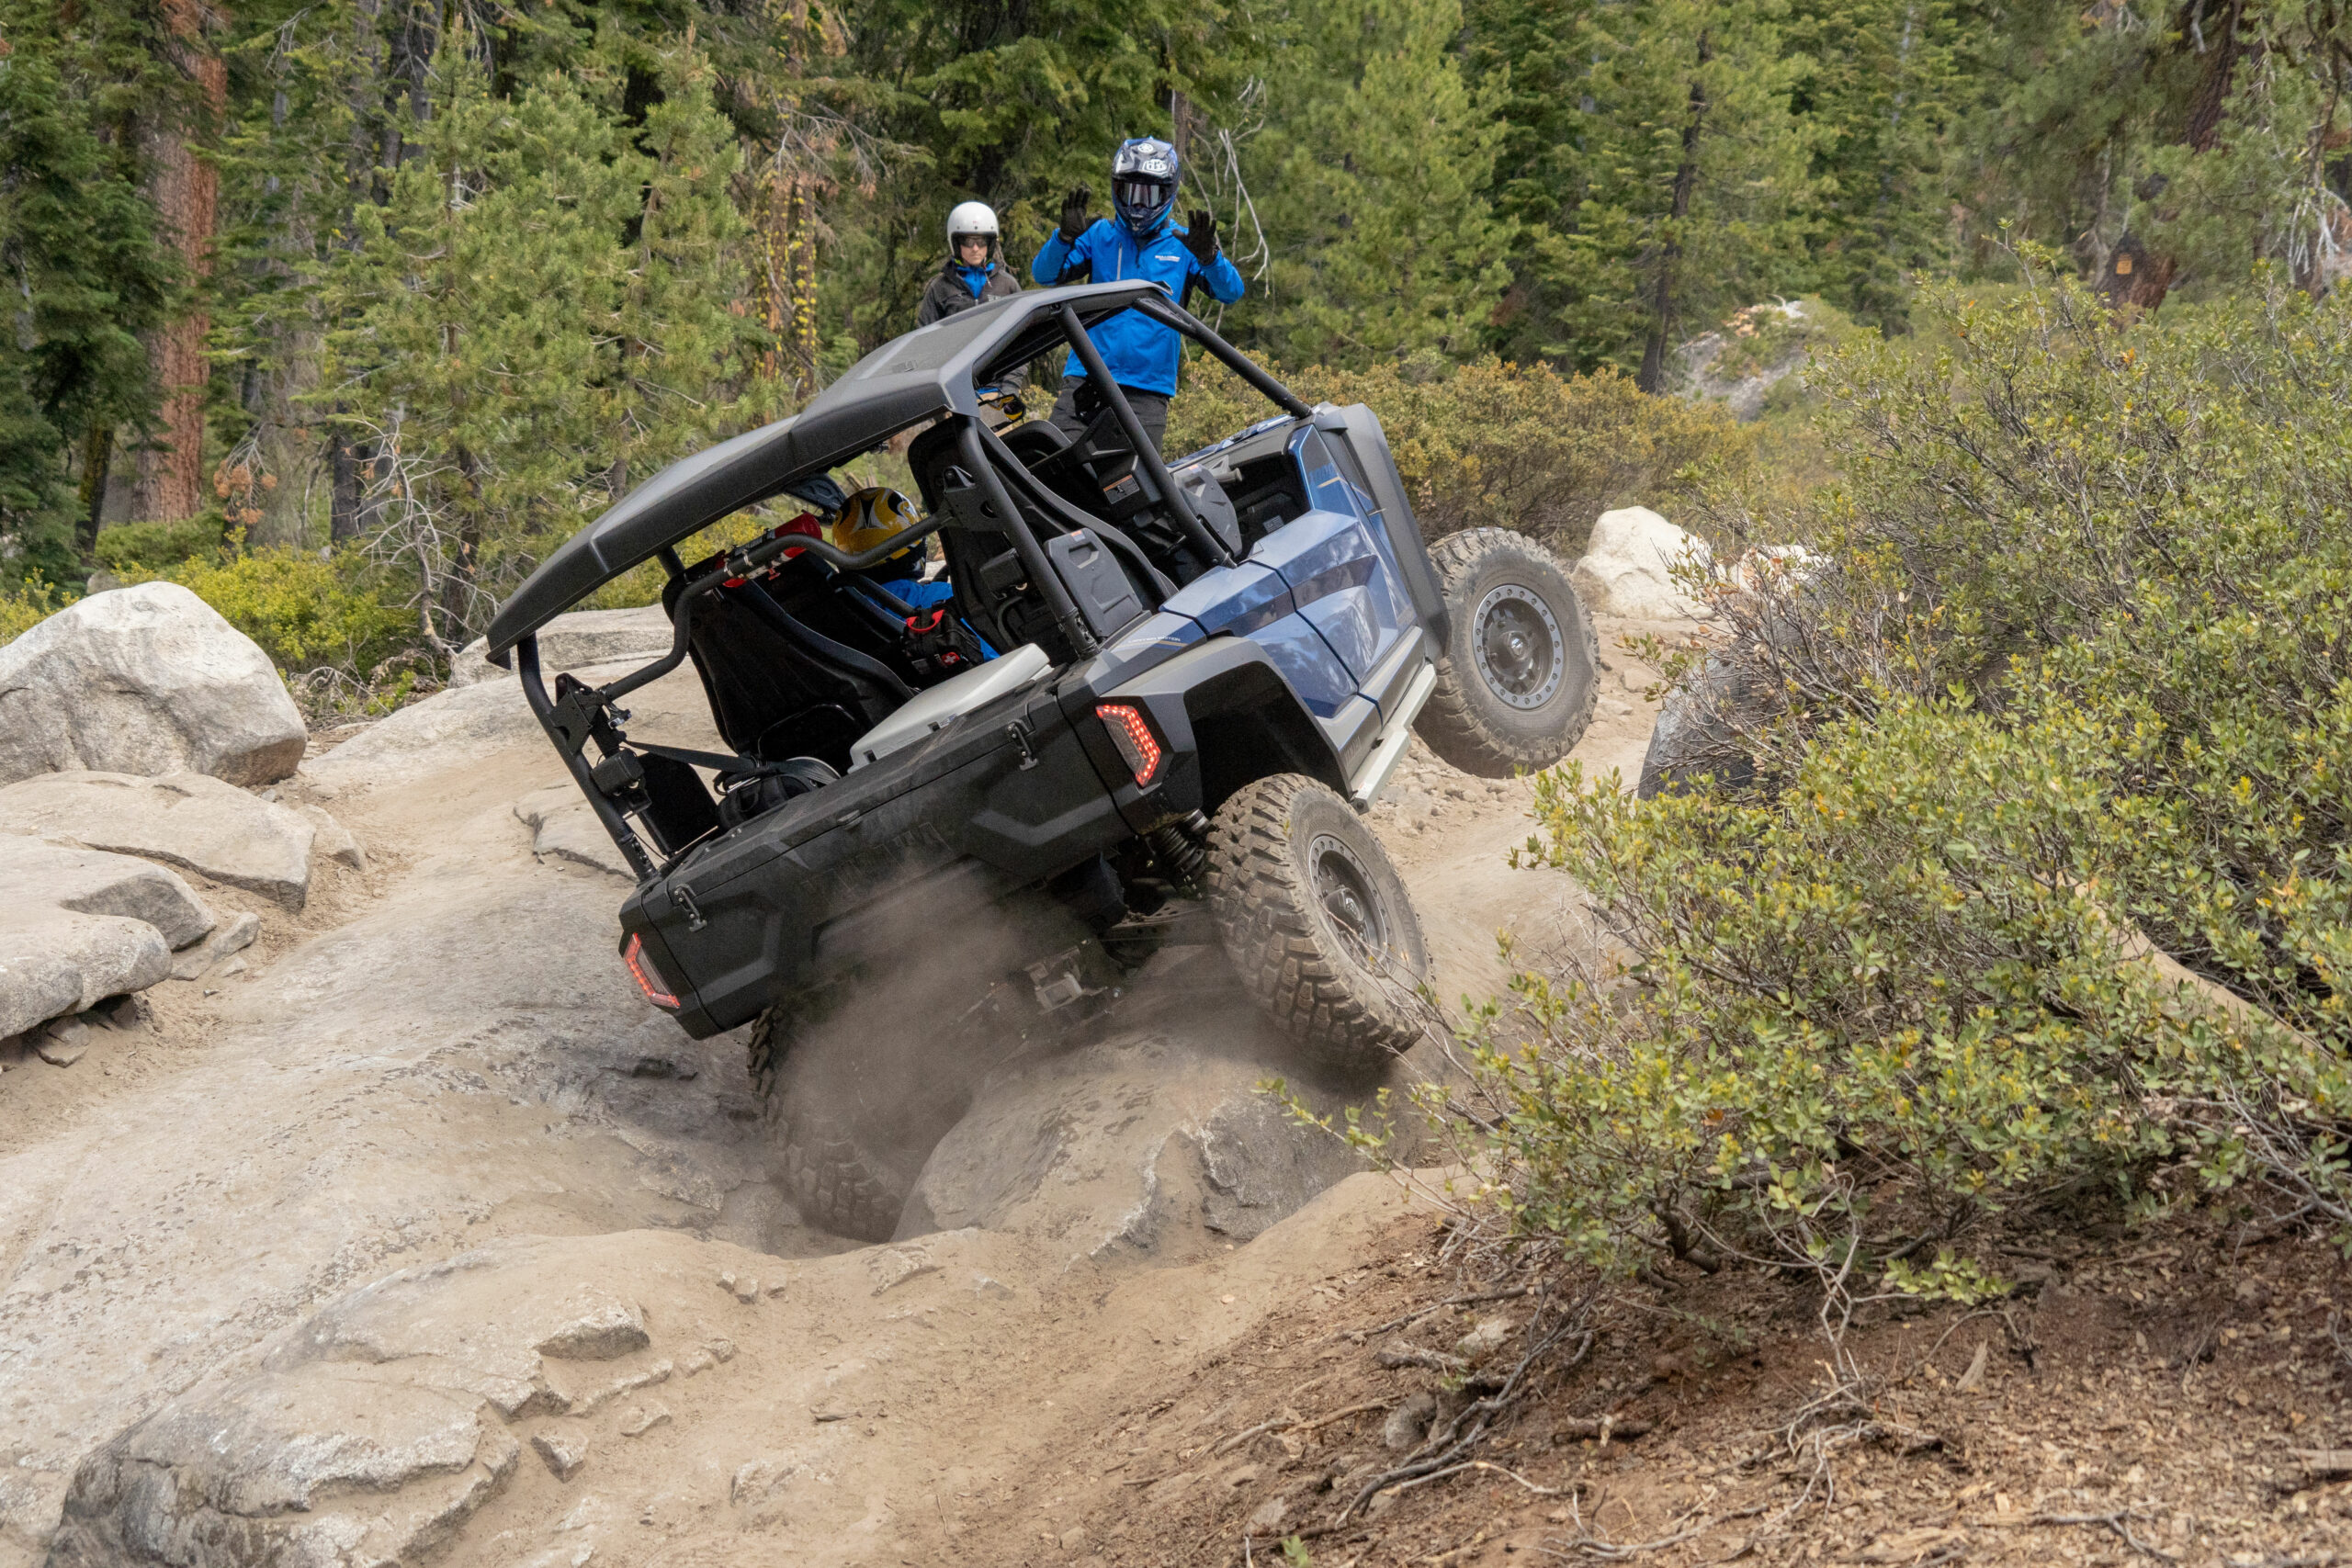 Built for any terrain the RMax is as tough as a truck.